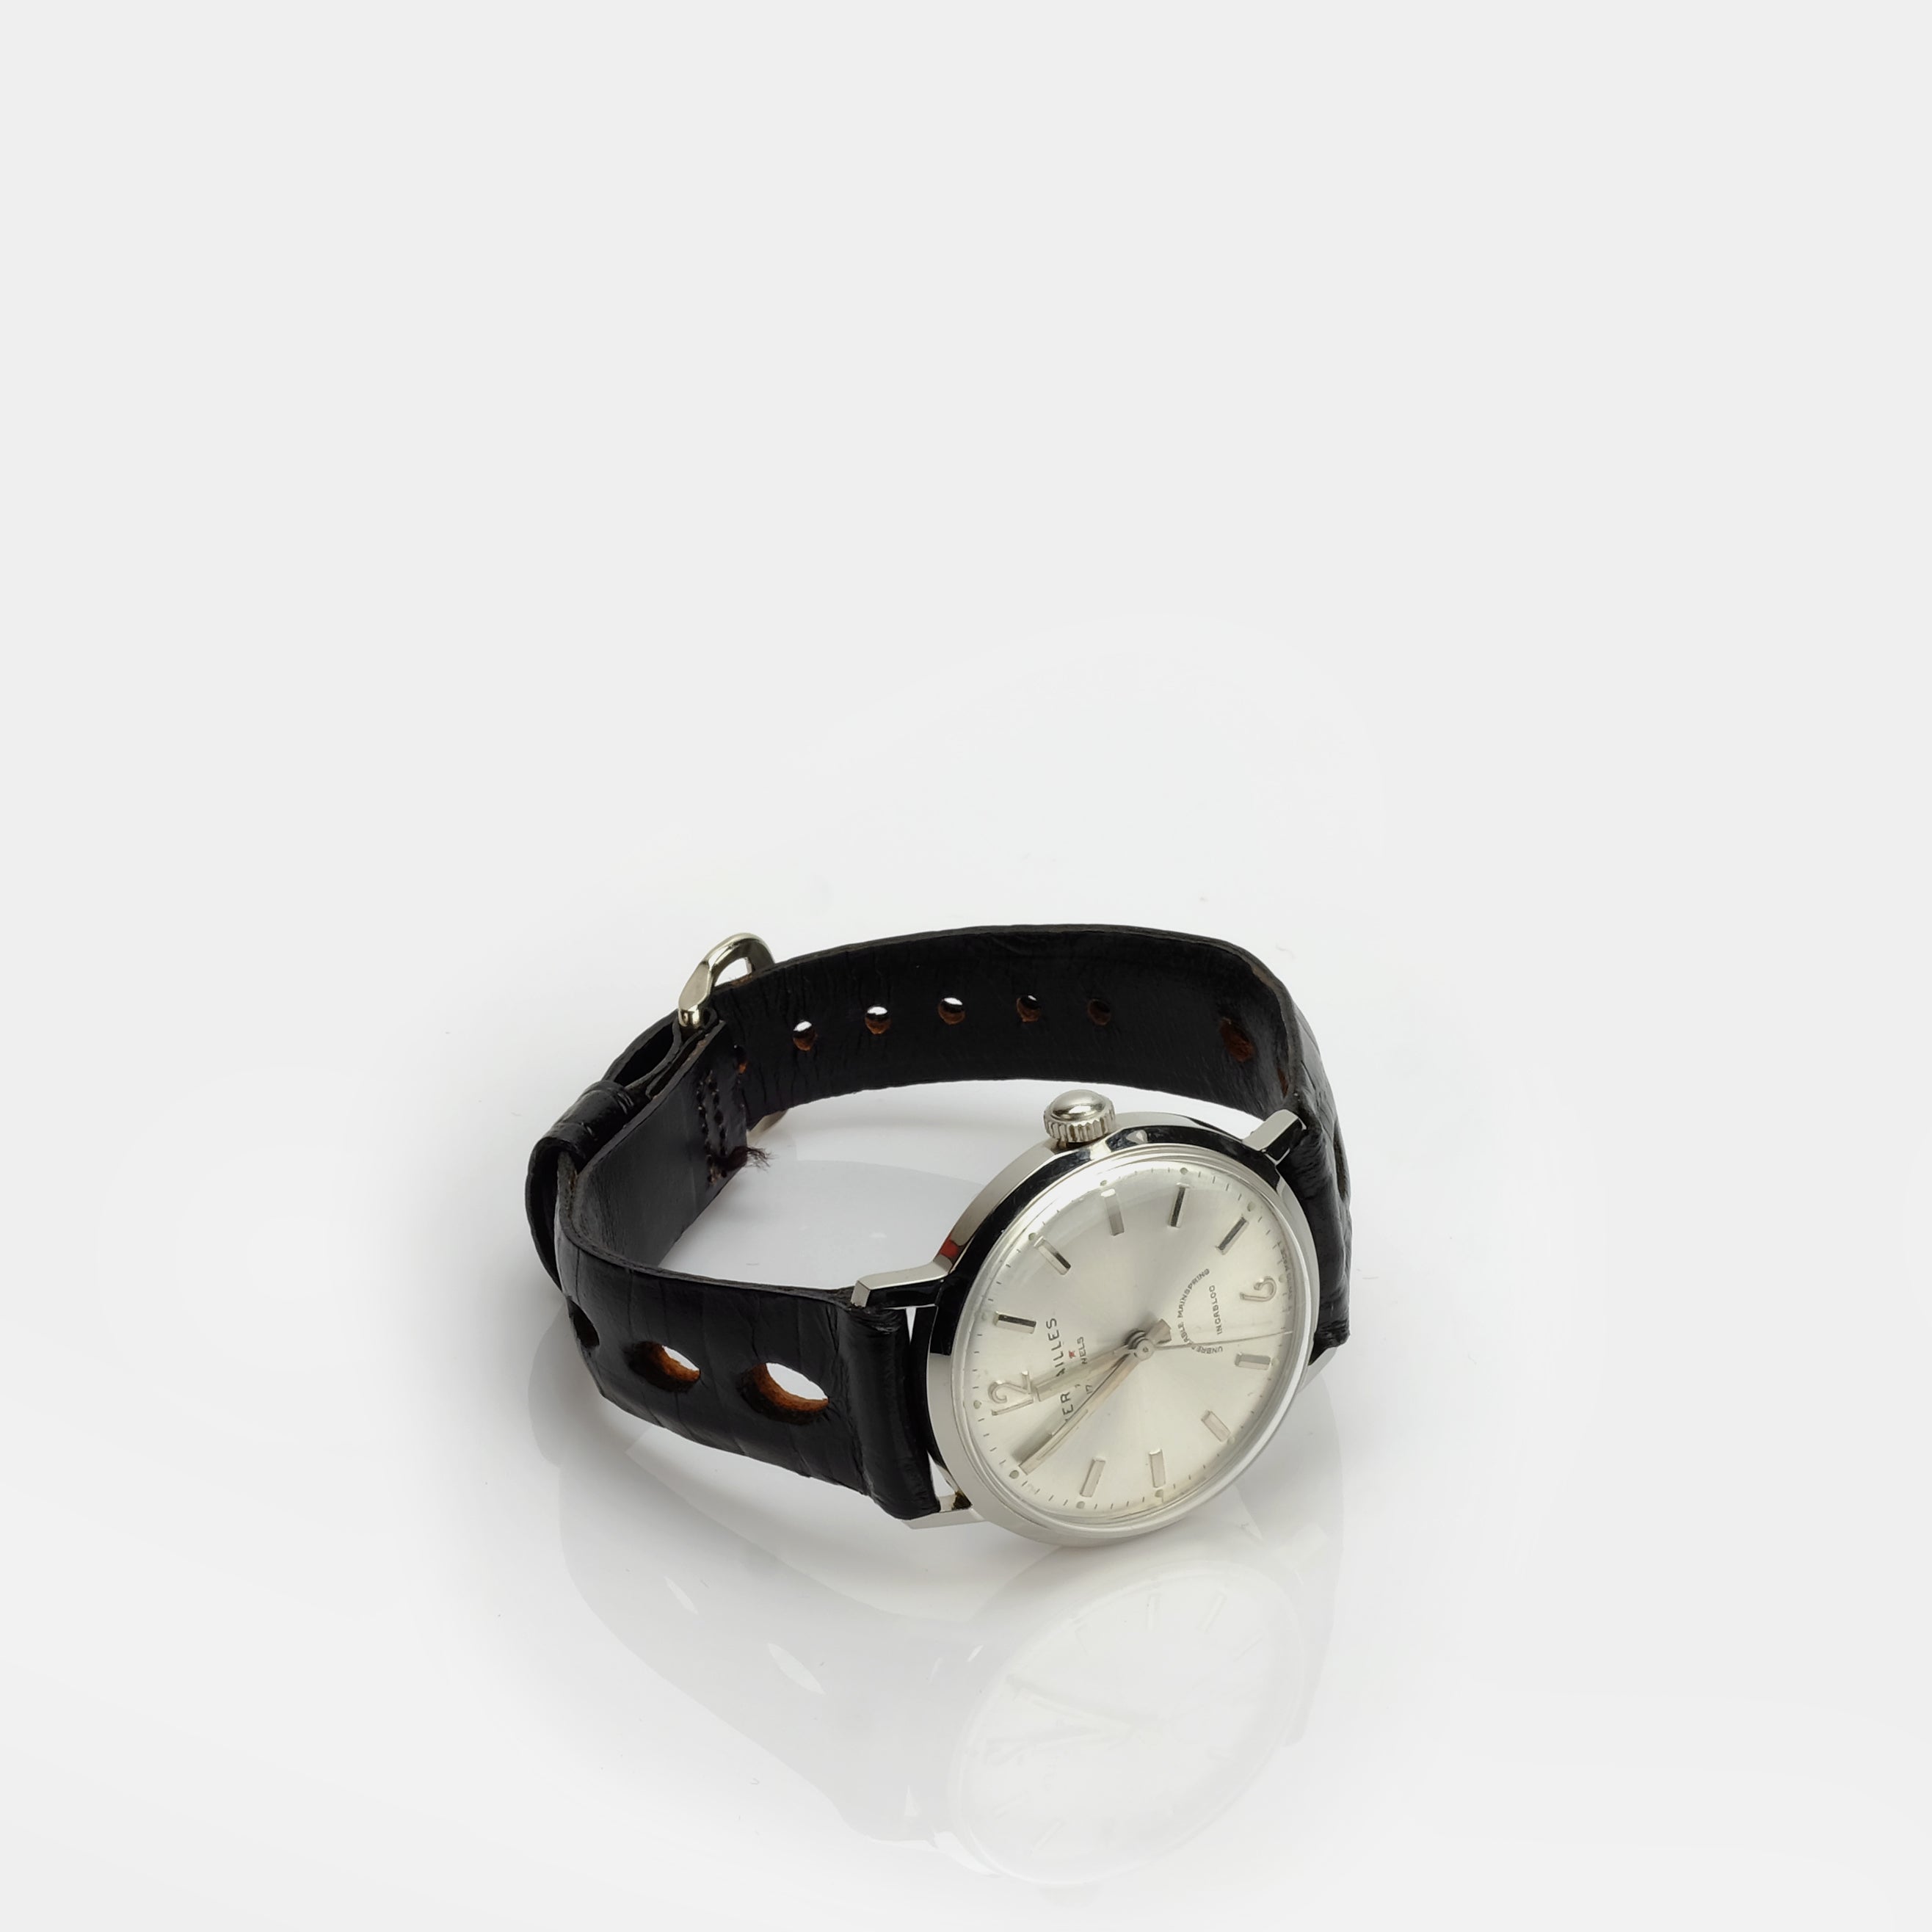 Versailles Time-Only Manual-Wind Circa 1960s Wristwatch